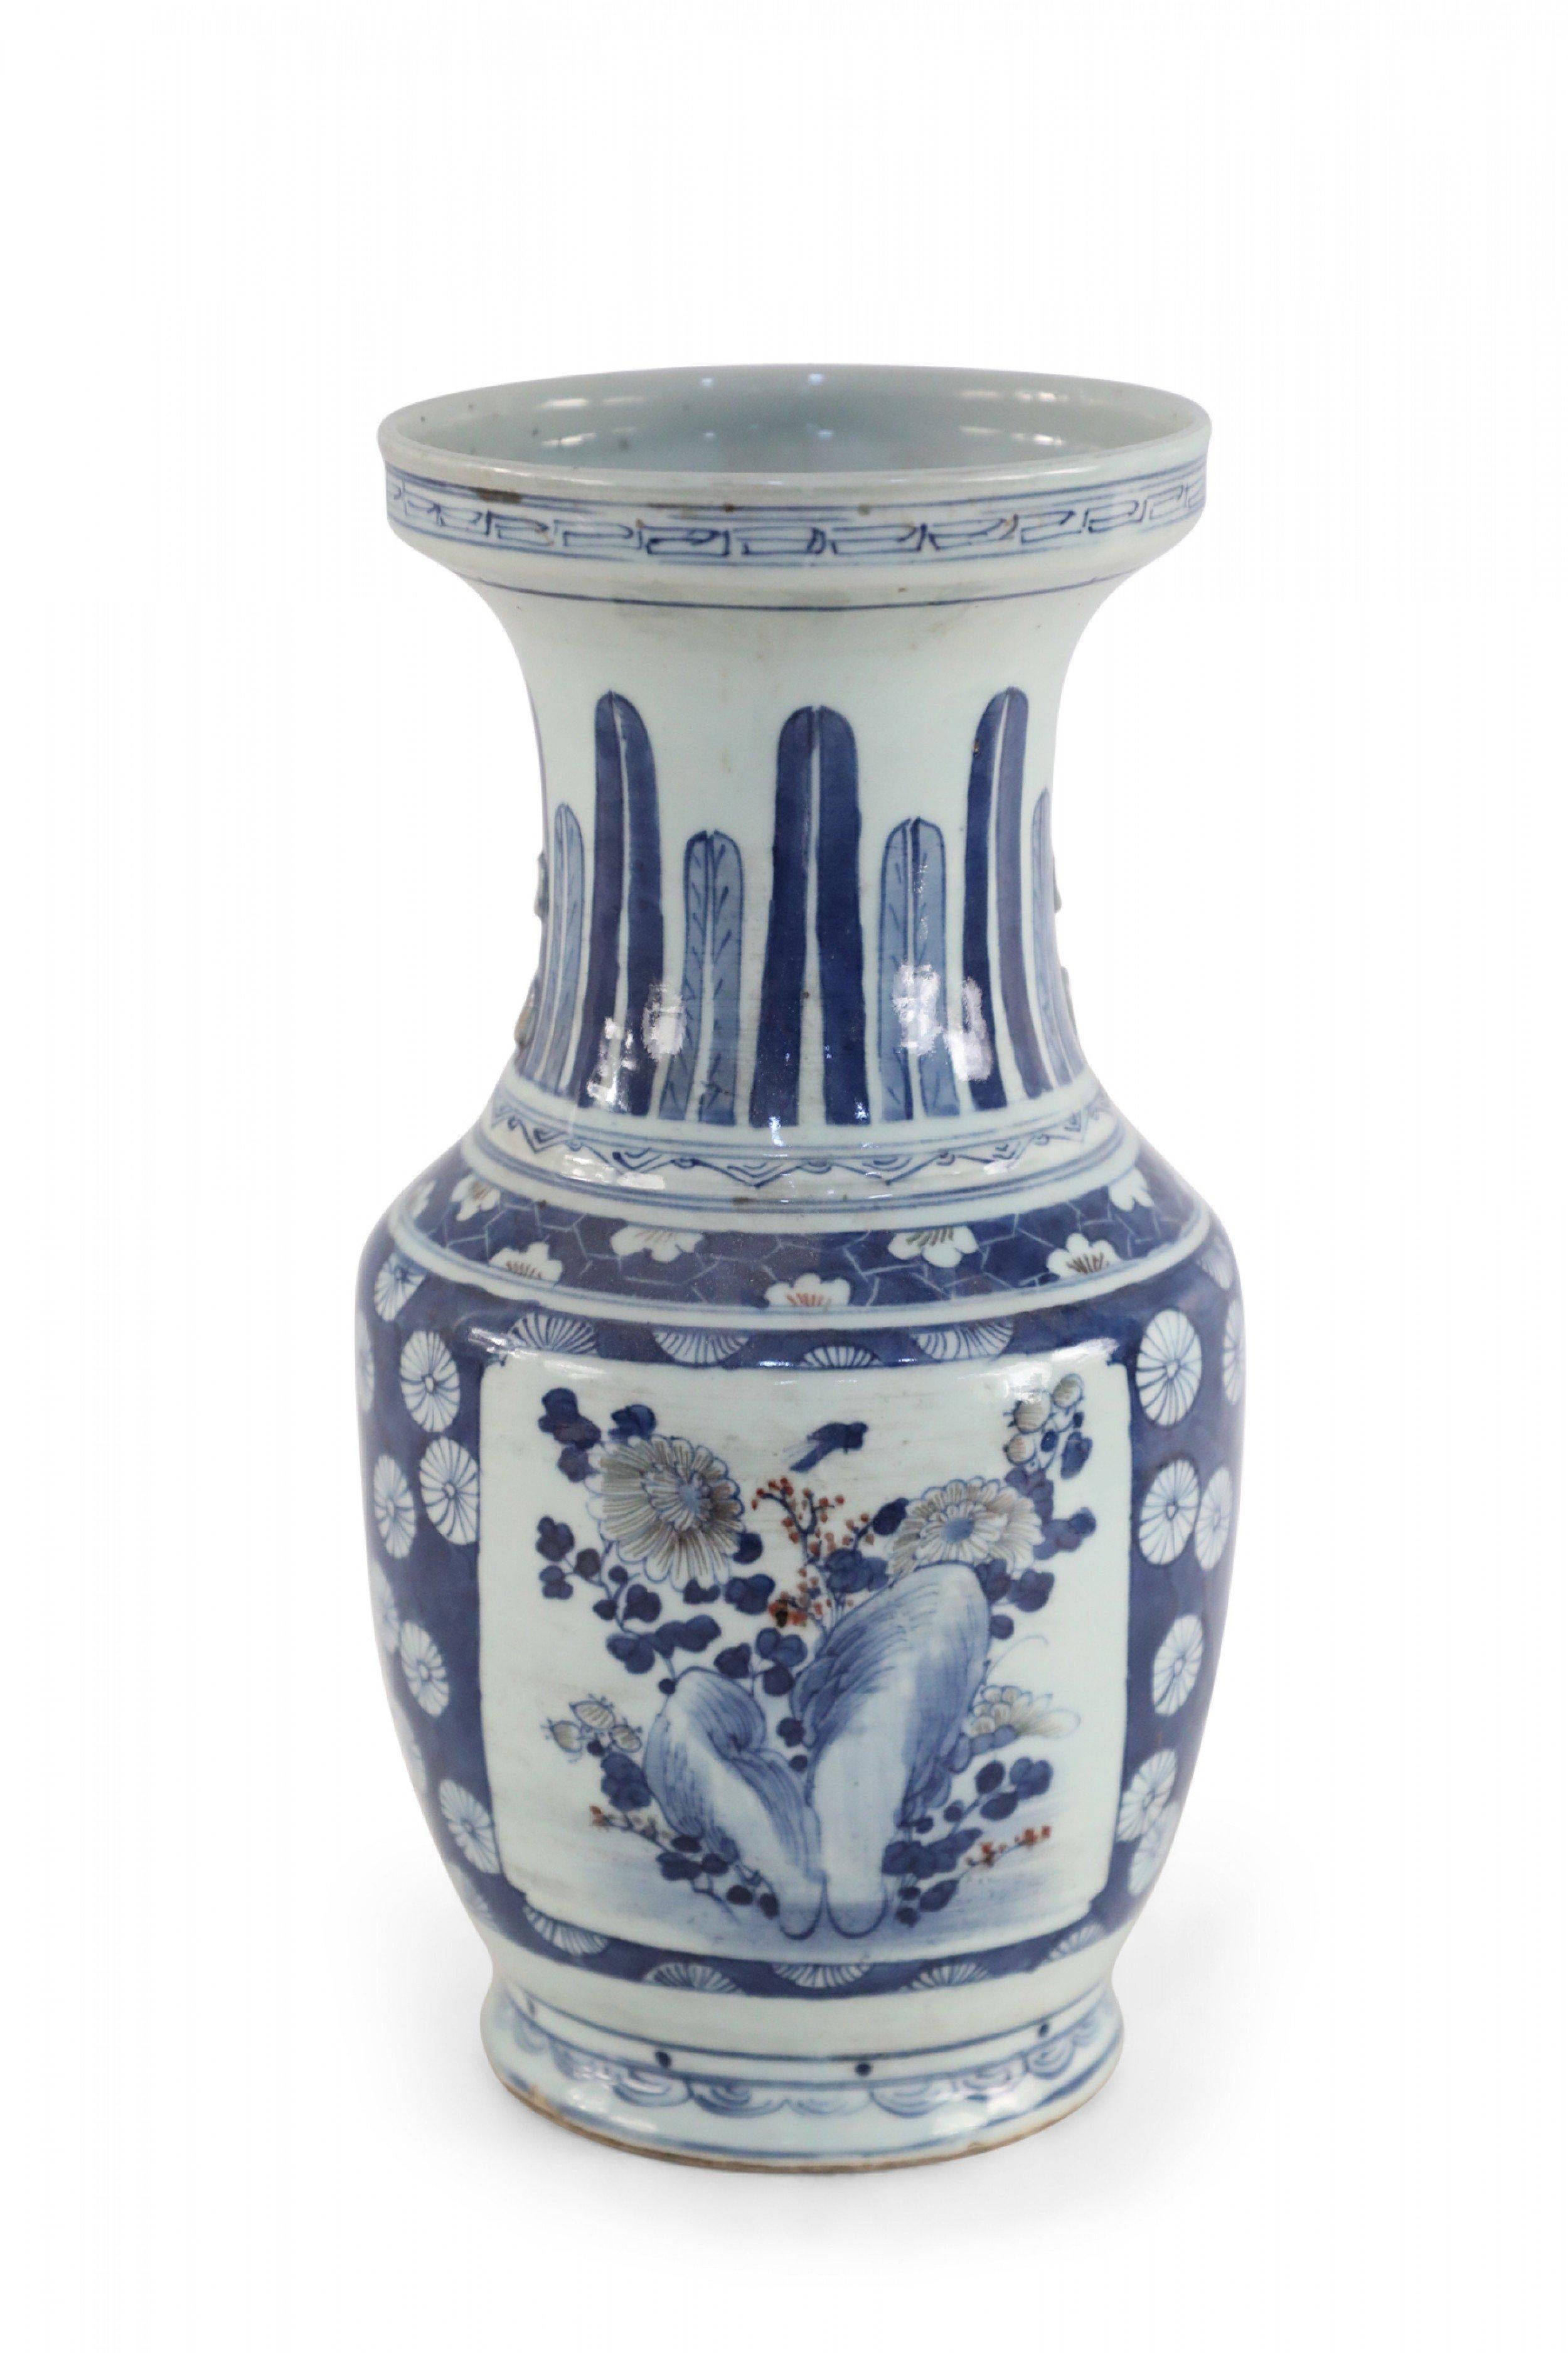 Chinese porcelain urn painted with a blue and white floral background surrounding a center square with a floral arrangement, feathers along the neck in varying shades of blue, and geometric patterned bands at the top, middle and base.
  